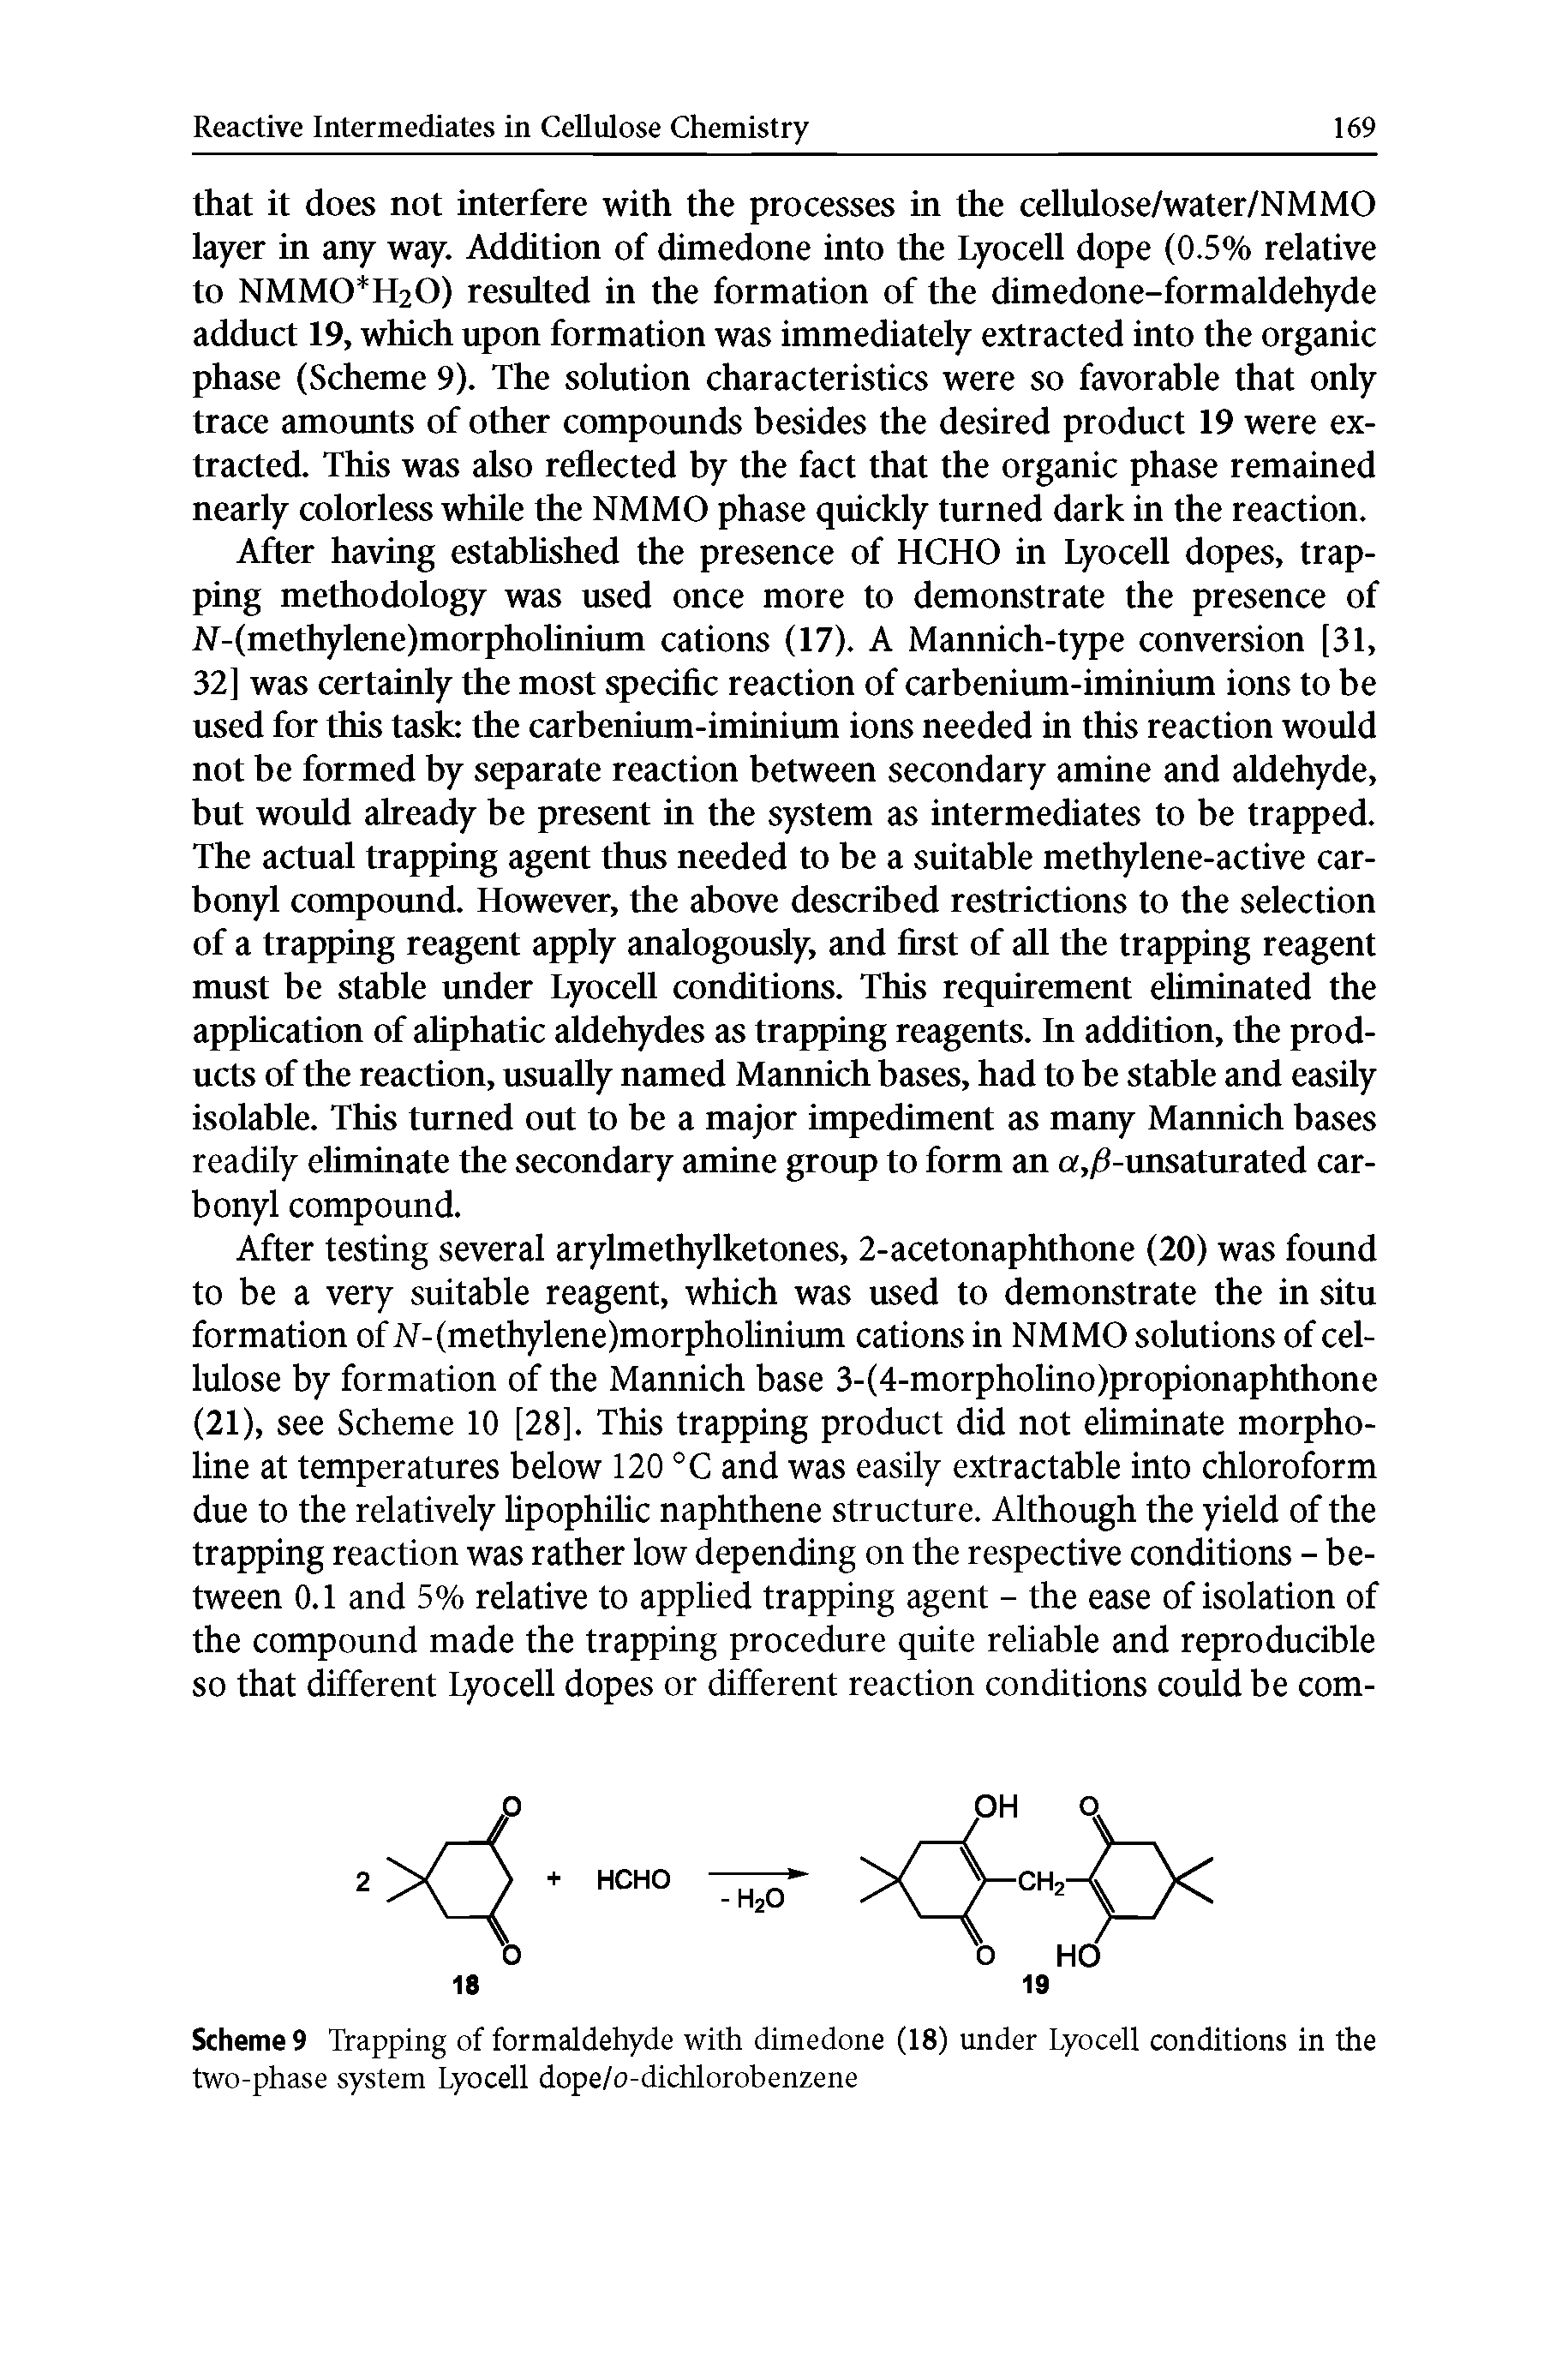 Scheme9 Trapping of formaldehyde with dimedone (18) under Lyocell conditions in the two-phase system Lyocell dope/o-dichlorobenzene...